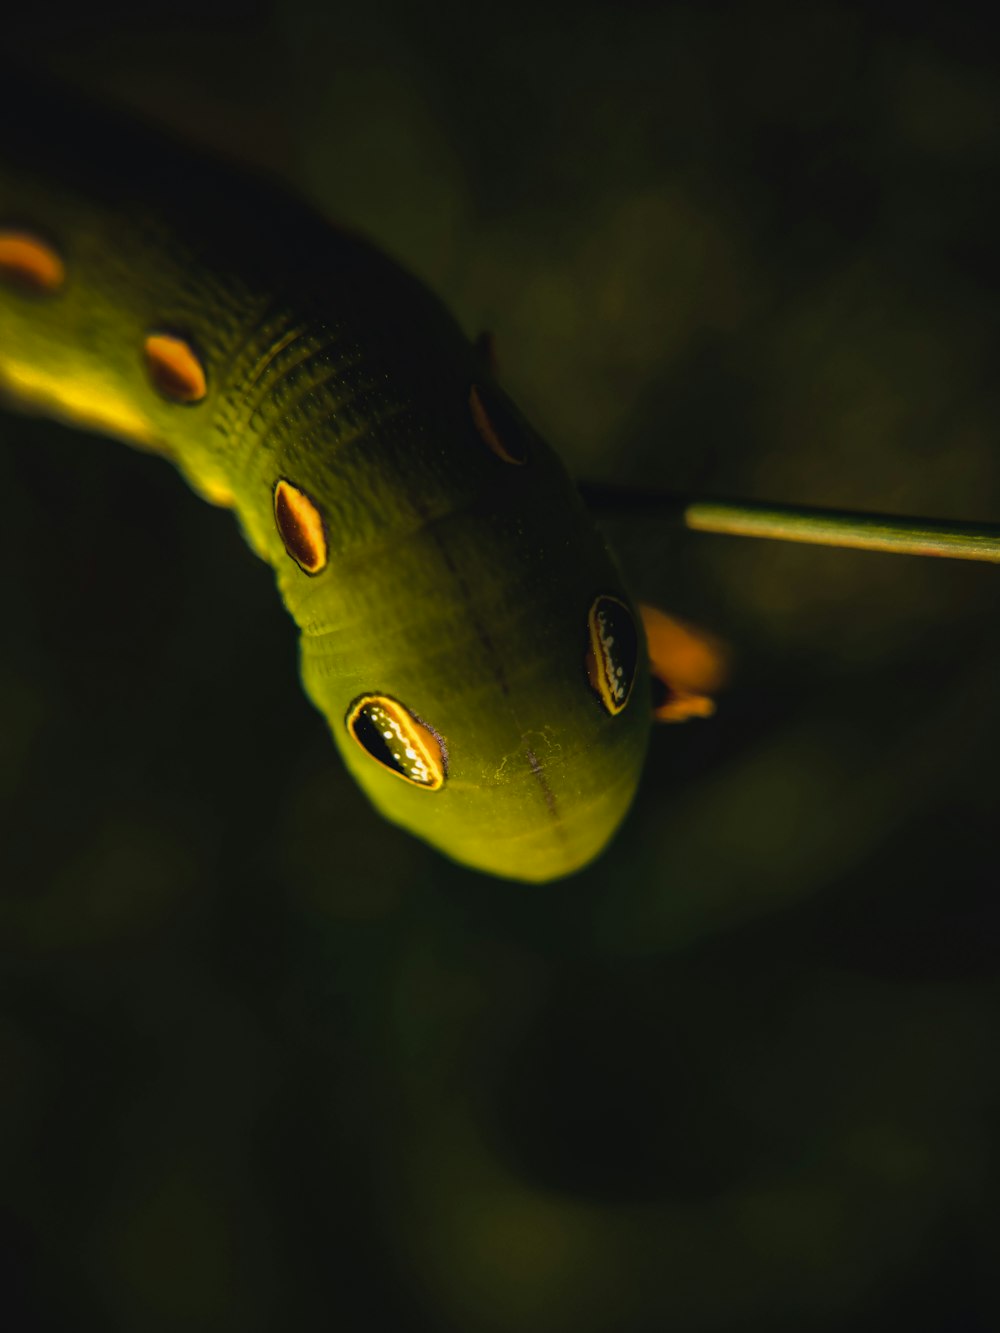 a close up of a green snake's head